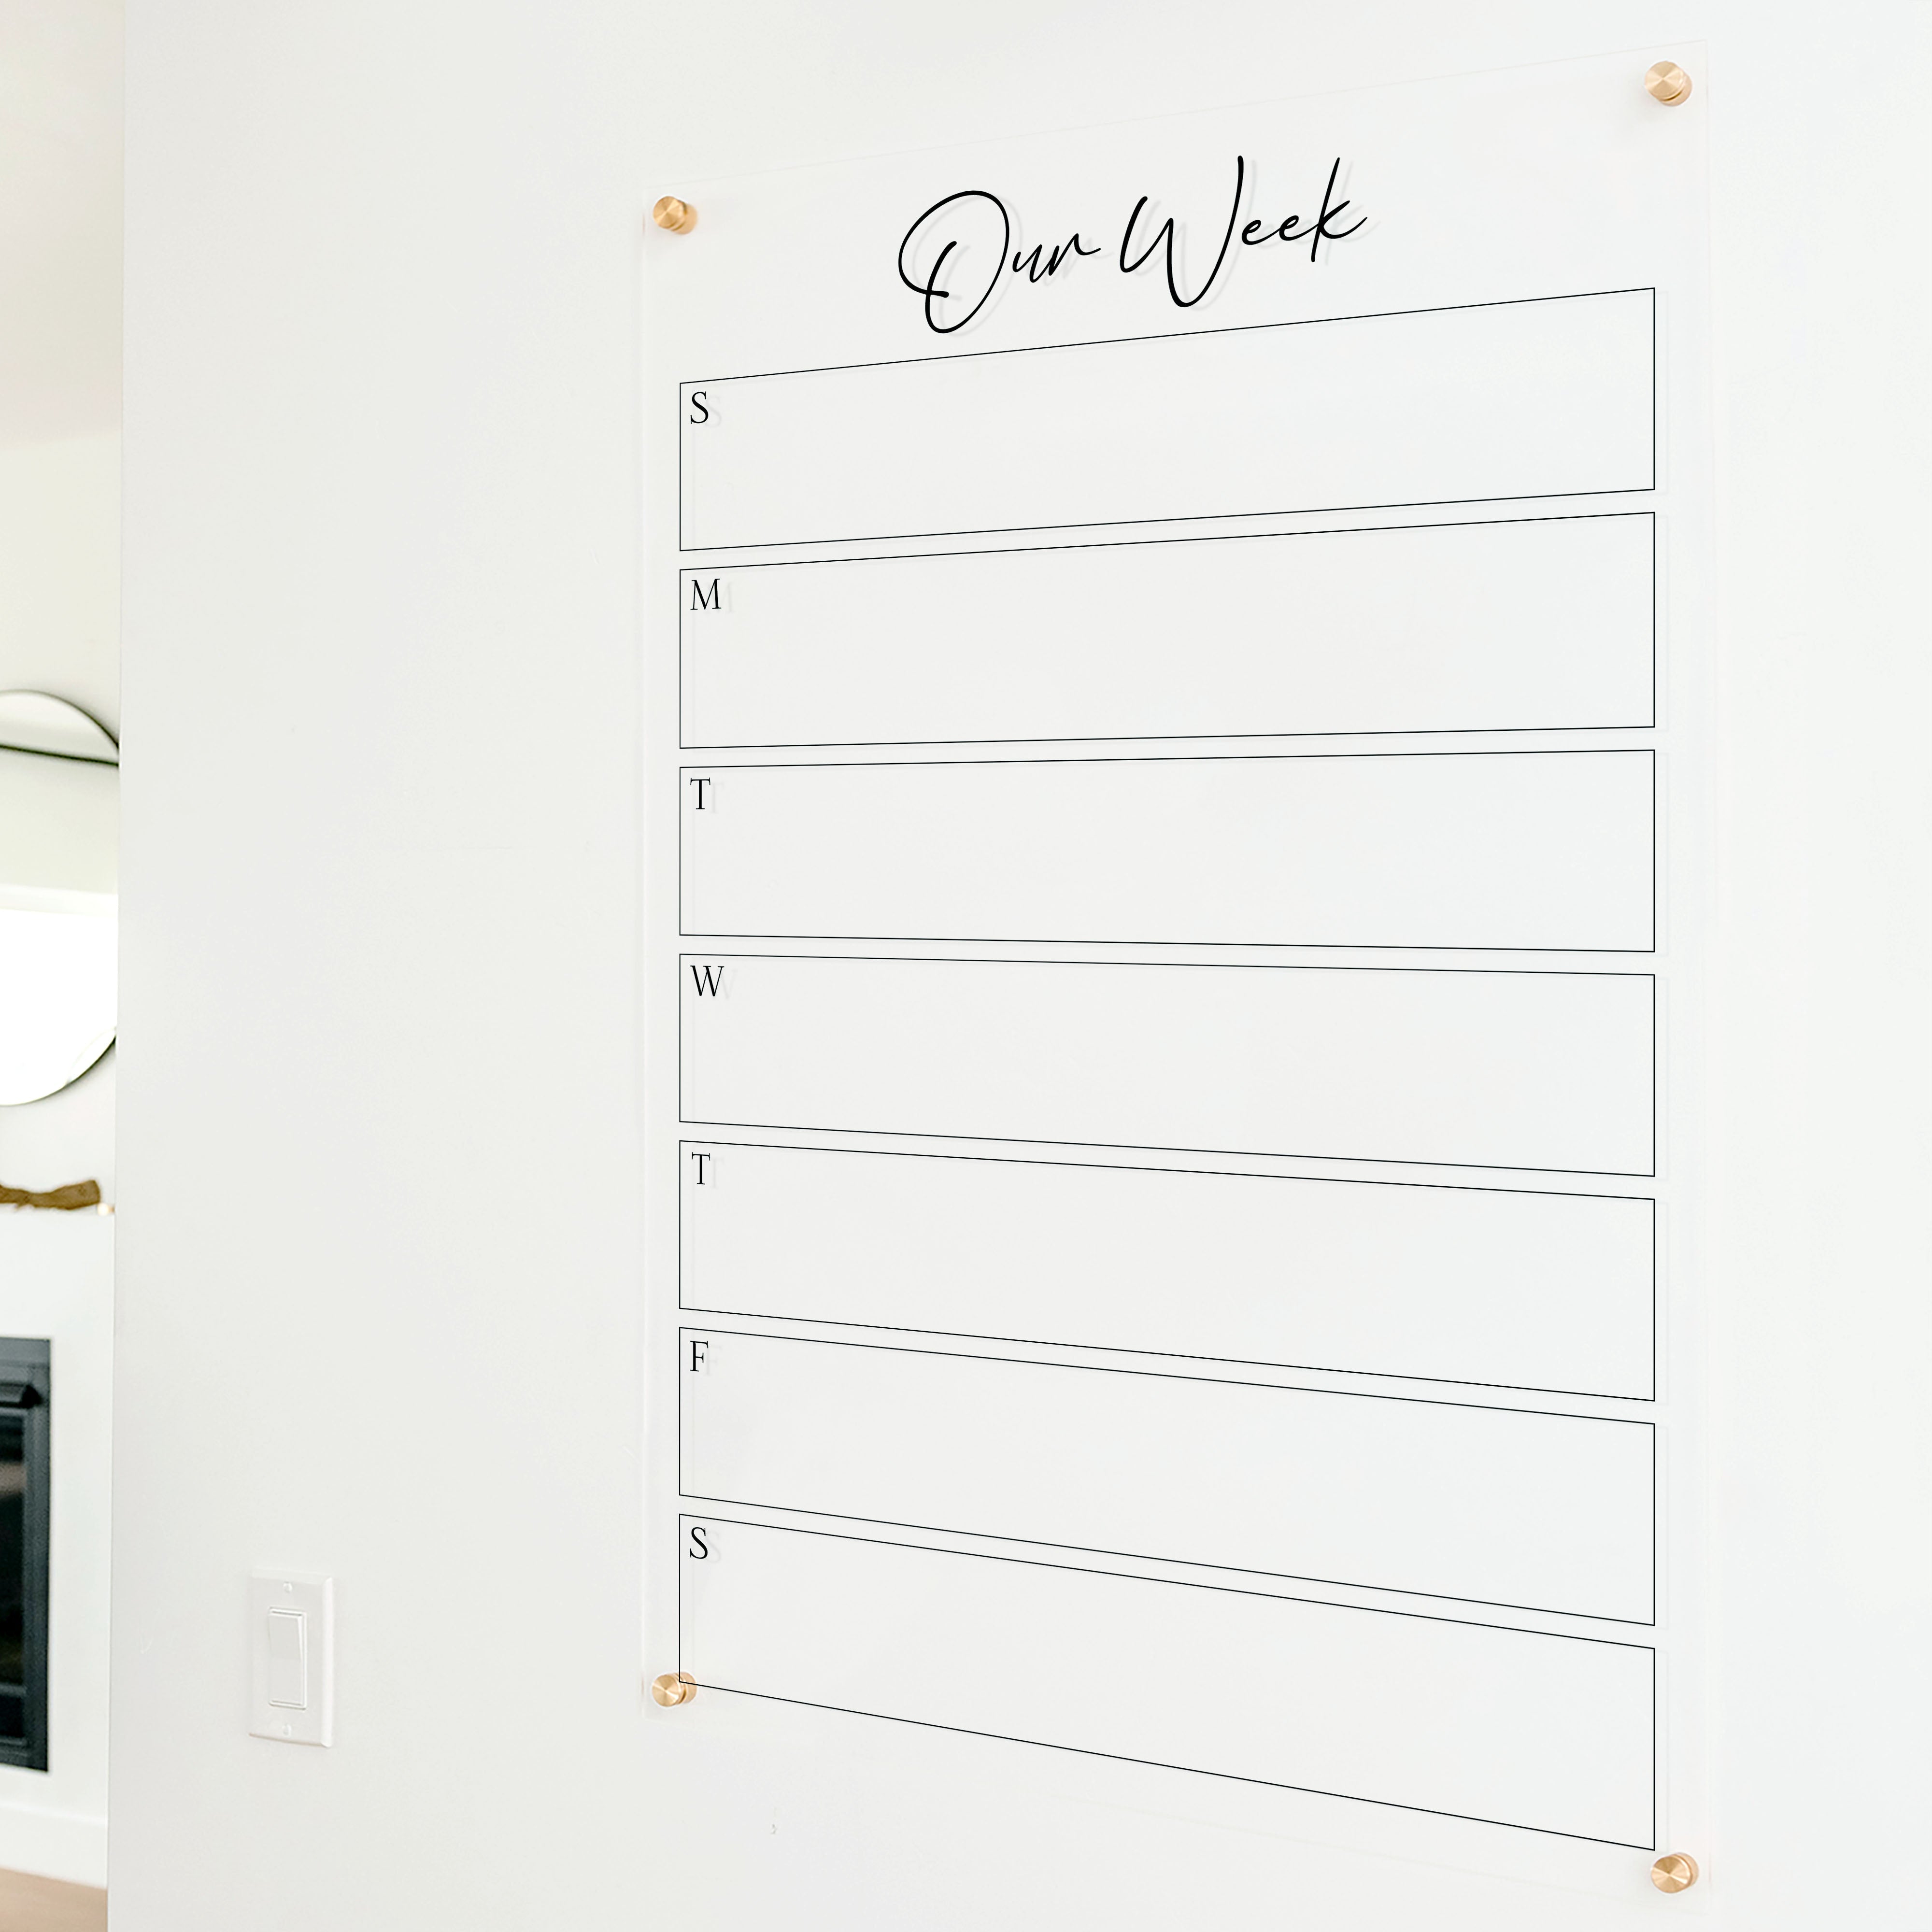 A Dry-erase weekly calender made of acrylic hanging on the wall